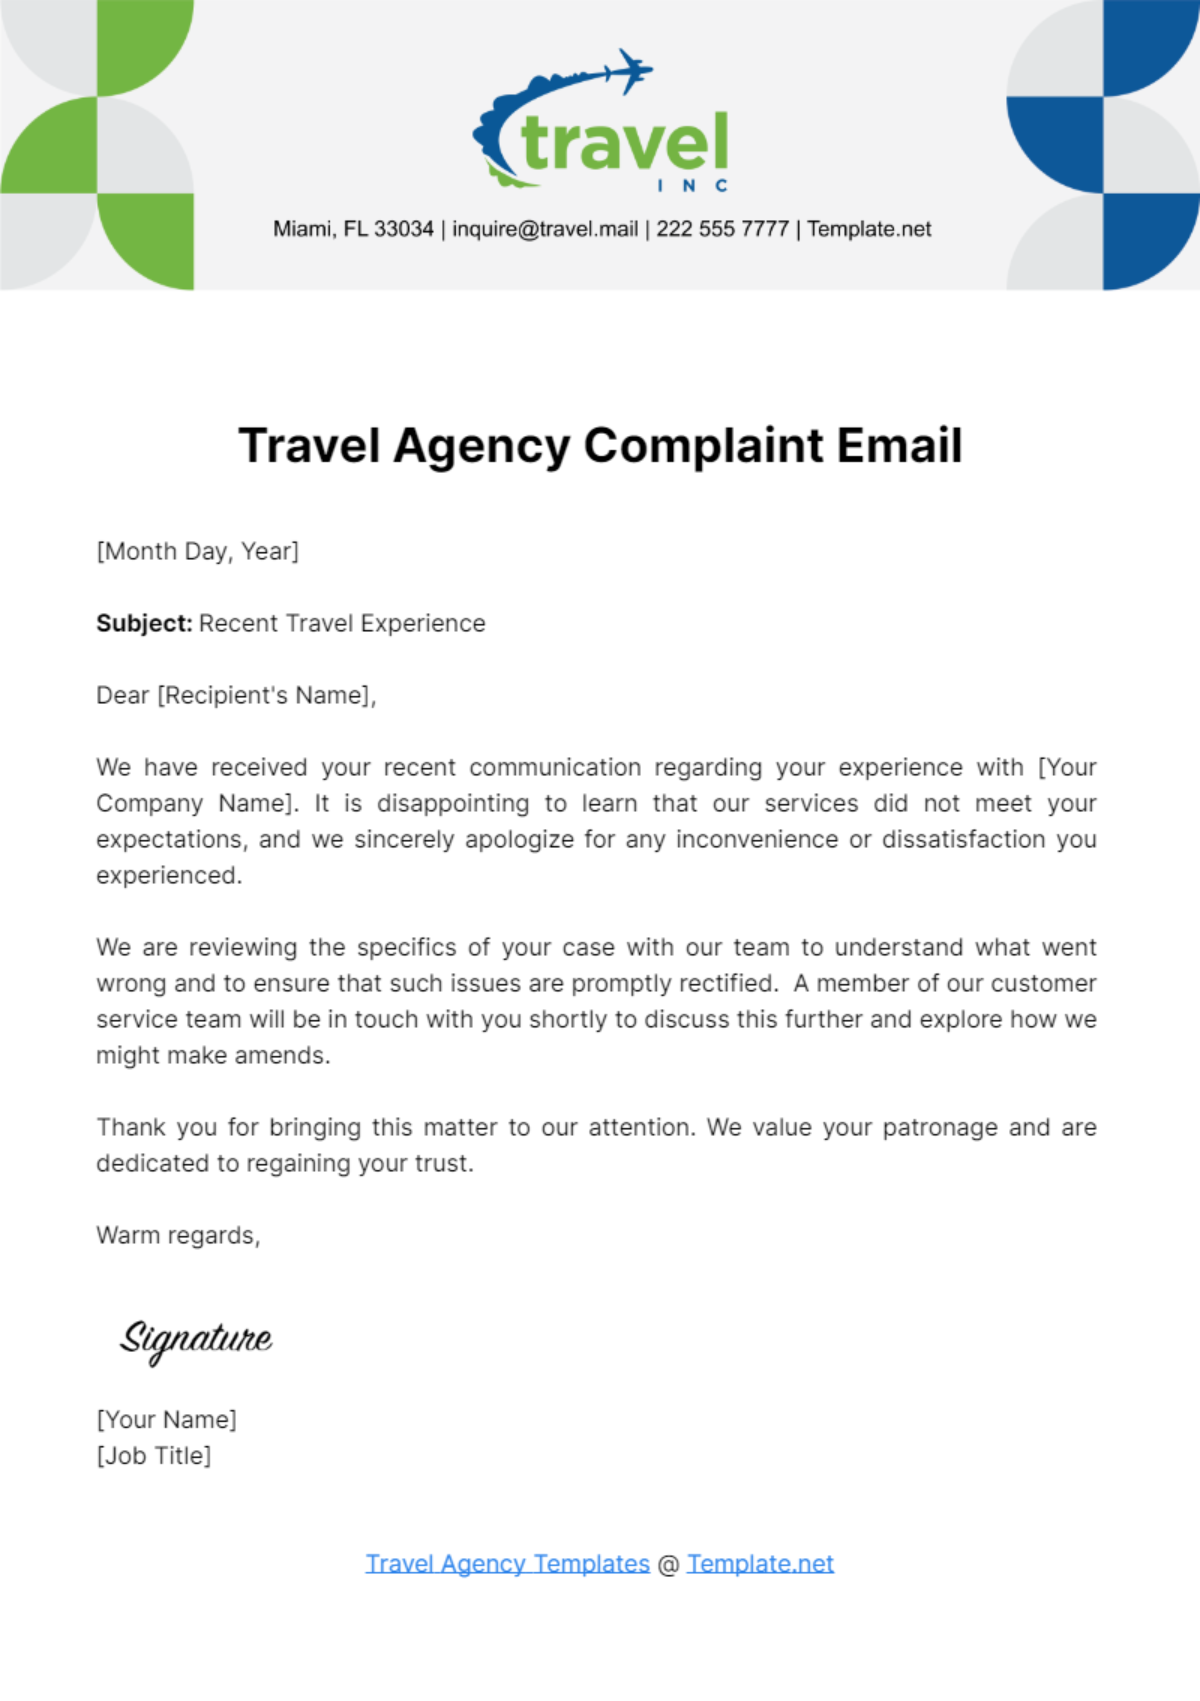 Free Travel Agency Complaint Email Template